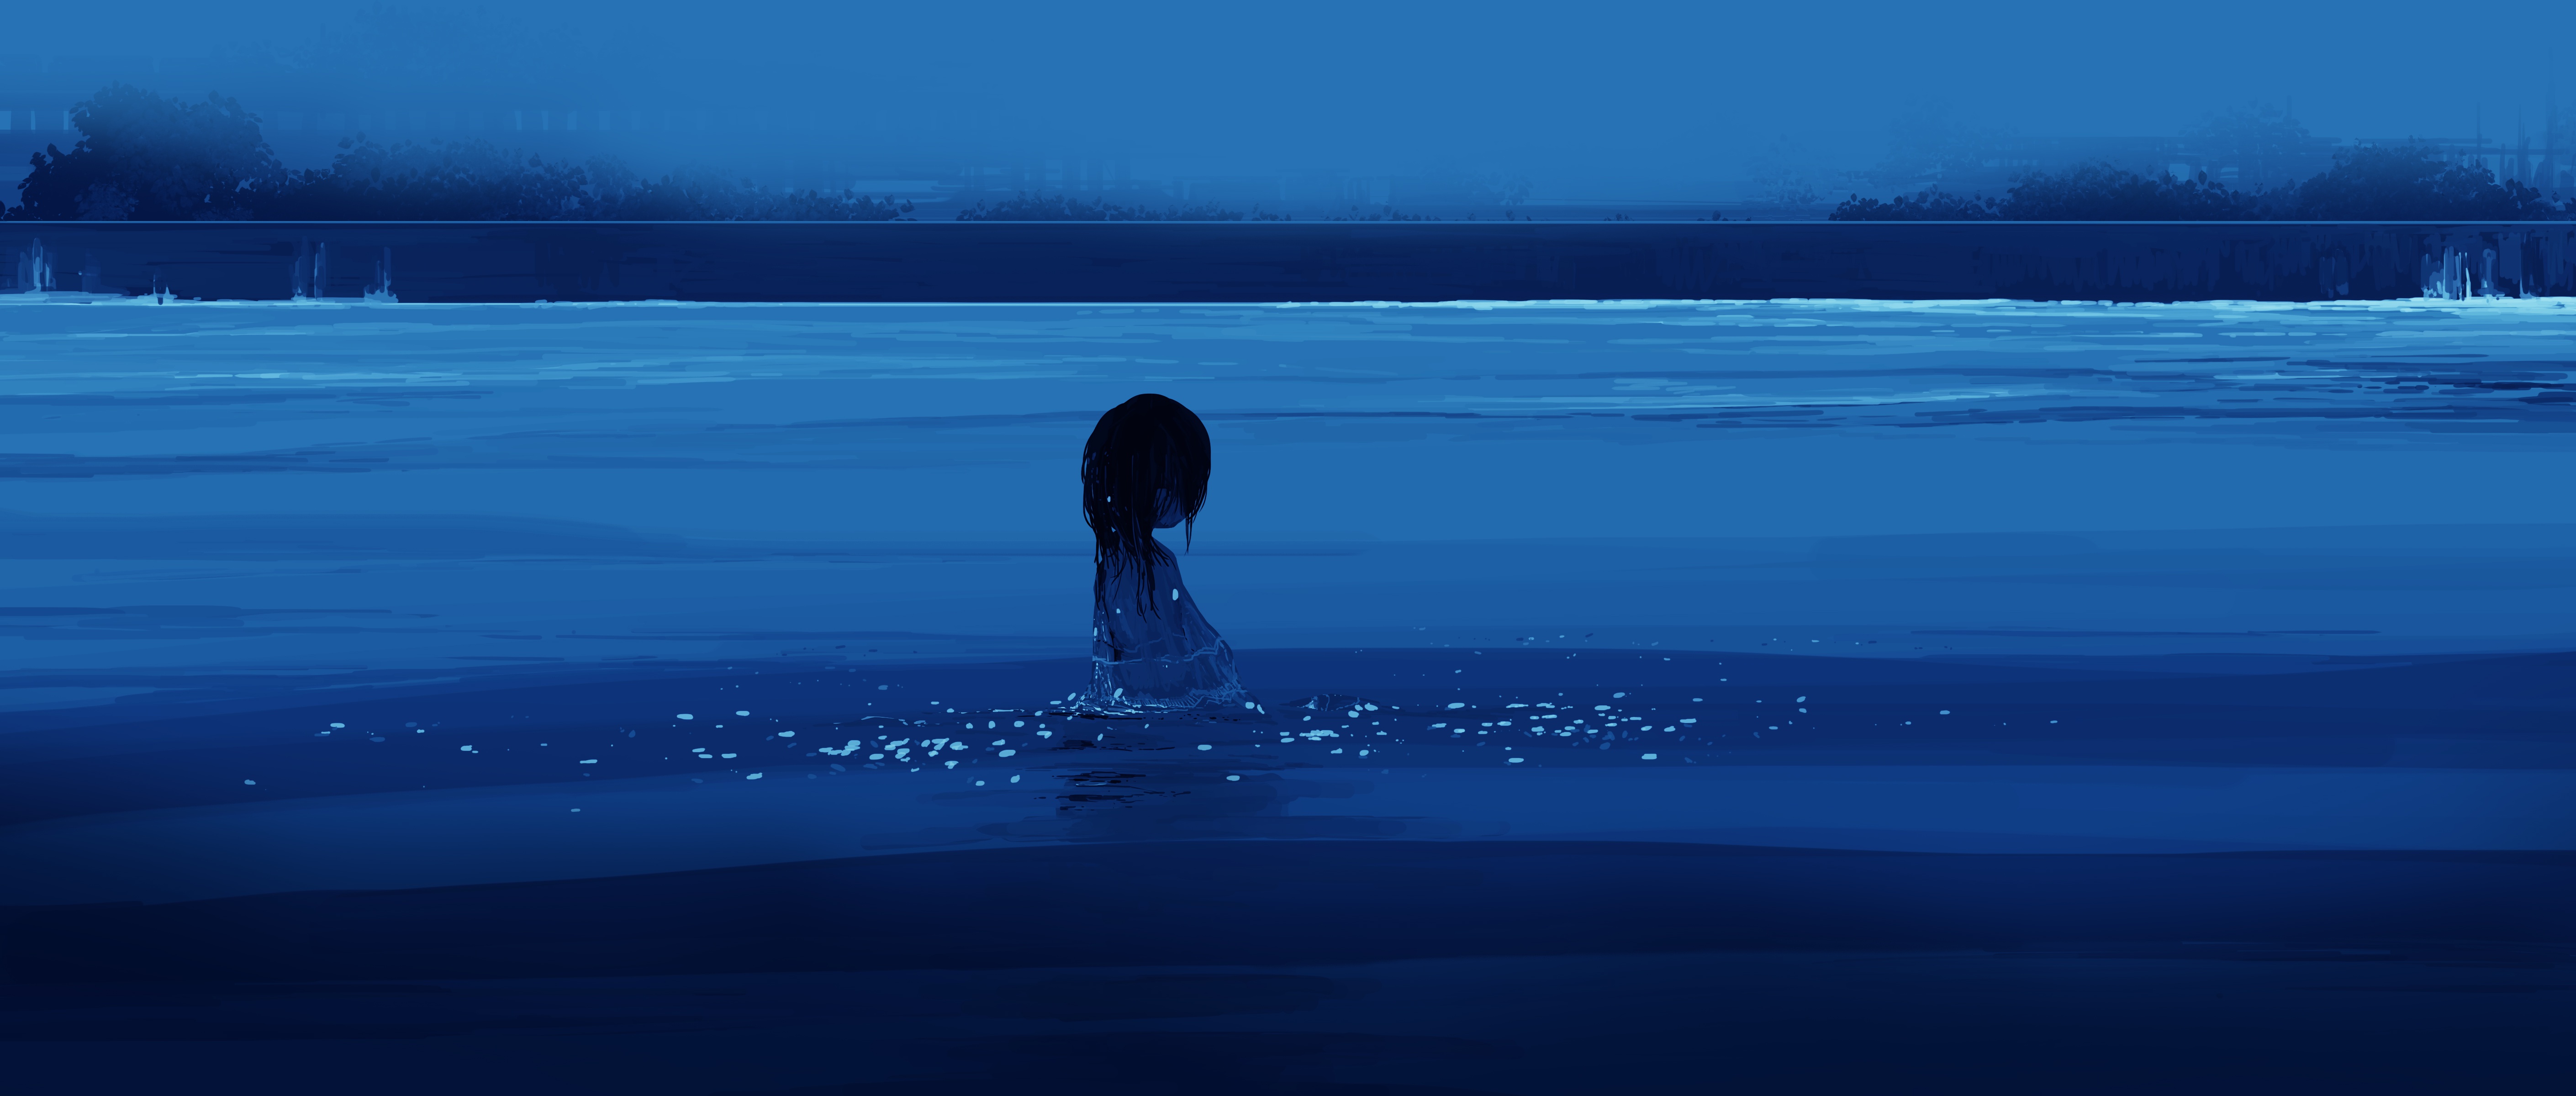 Anime Girls Sea Water Swimming In Water Minimalism Simple Background Short Hair Gracile 5640x2400